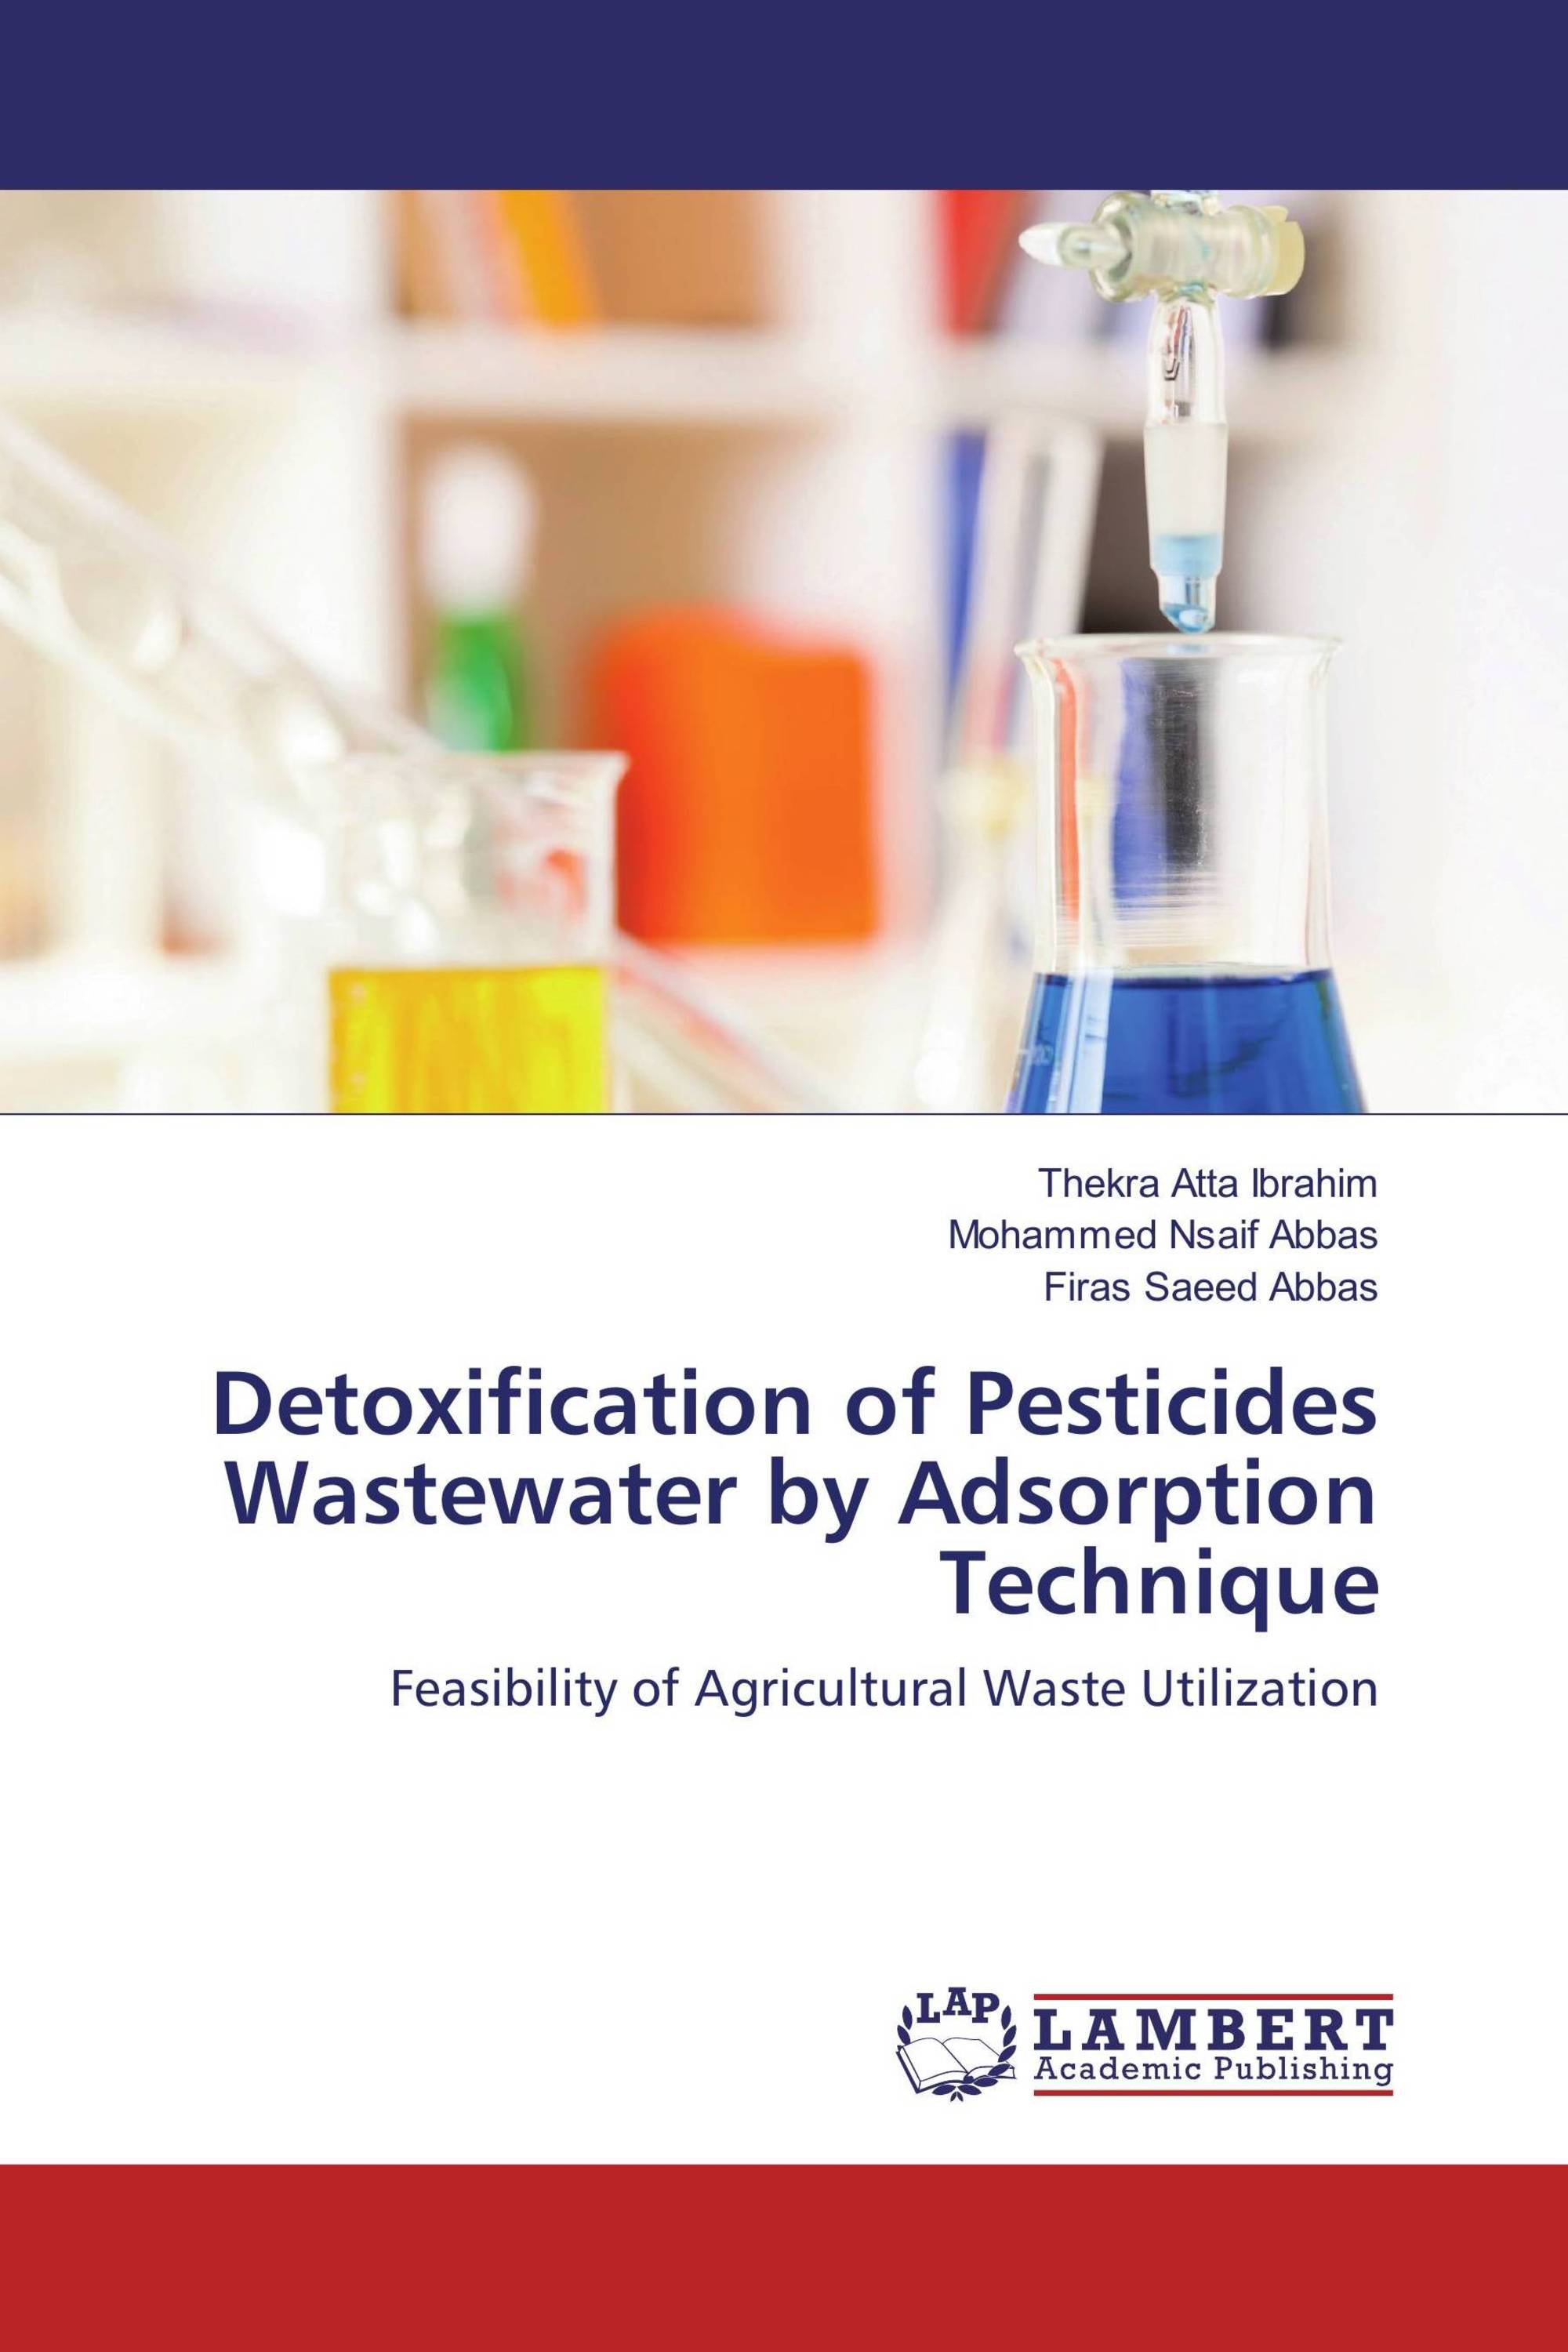 Detoxification of Pesticides Wastewater by Adsorption Technique